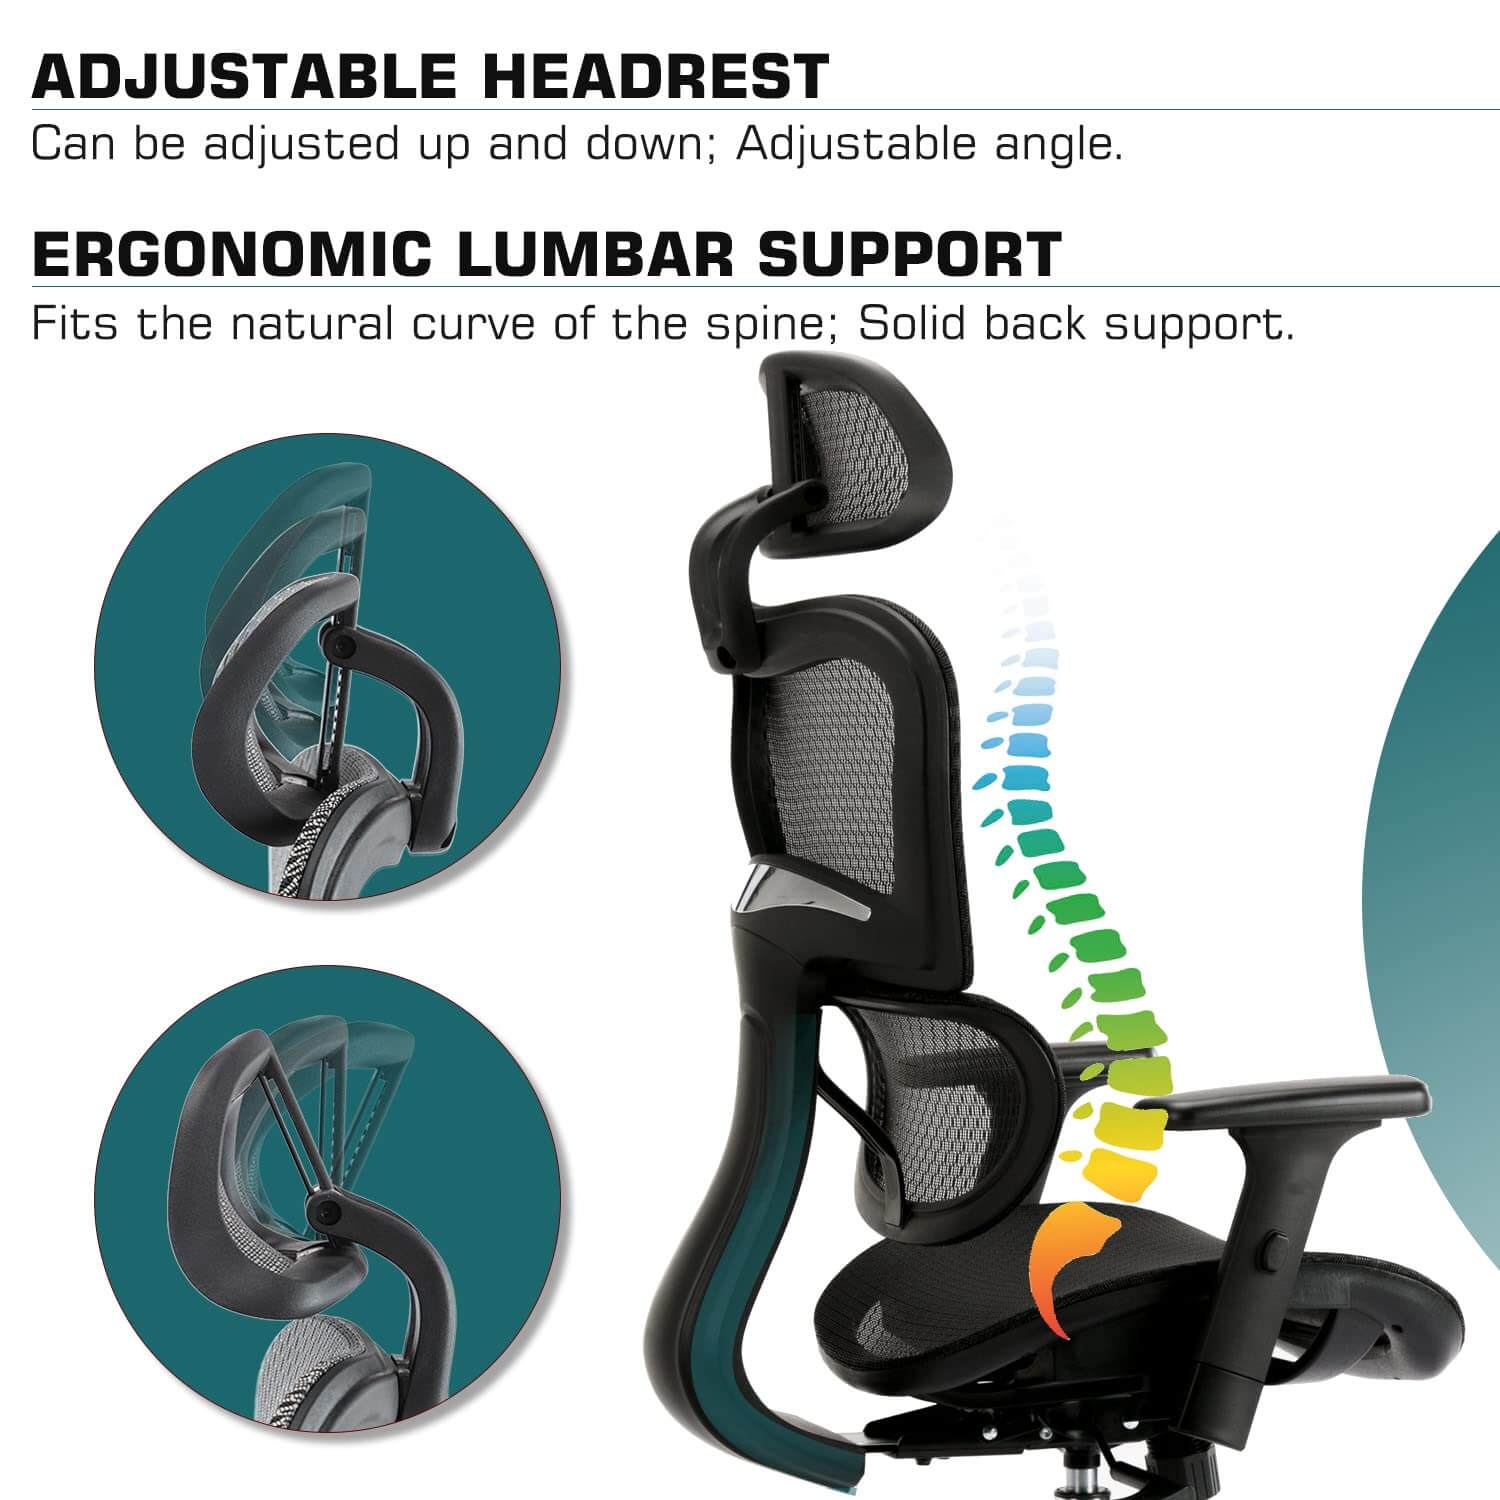 Sweetcrispy Lumbar Support Gaming Chair Mesh Ergonomic Office Chair with  Headrest